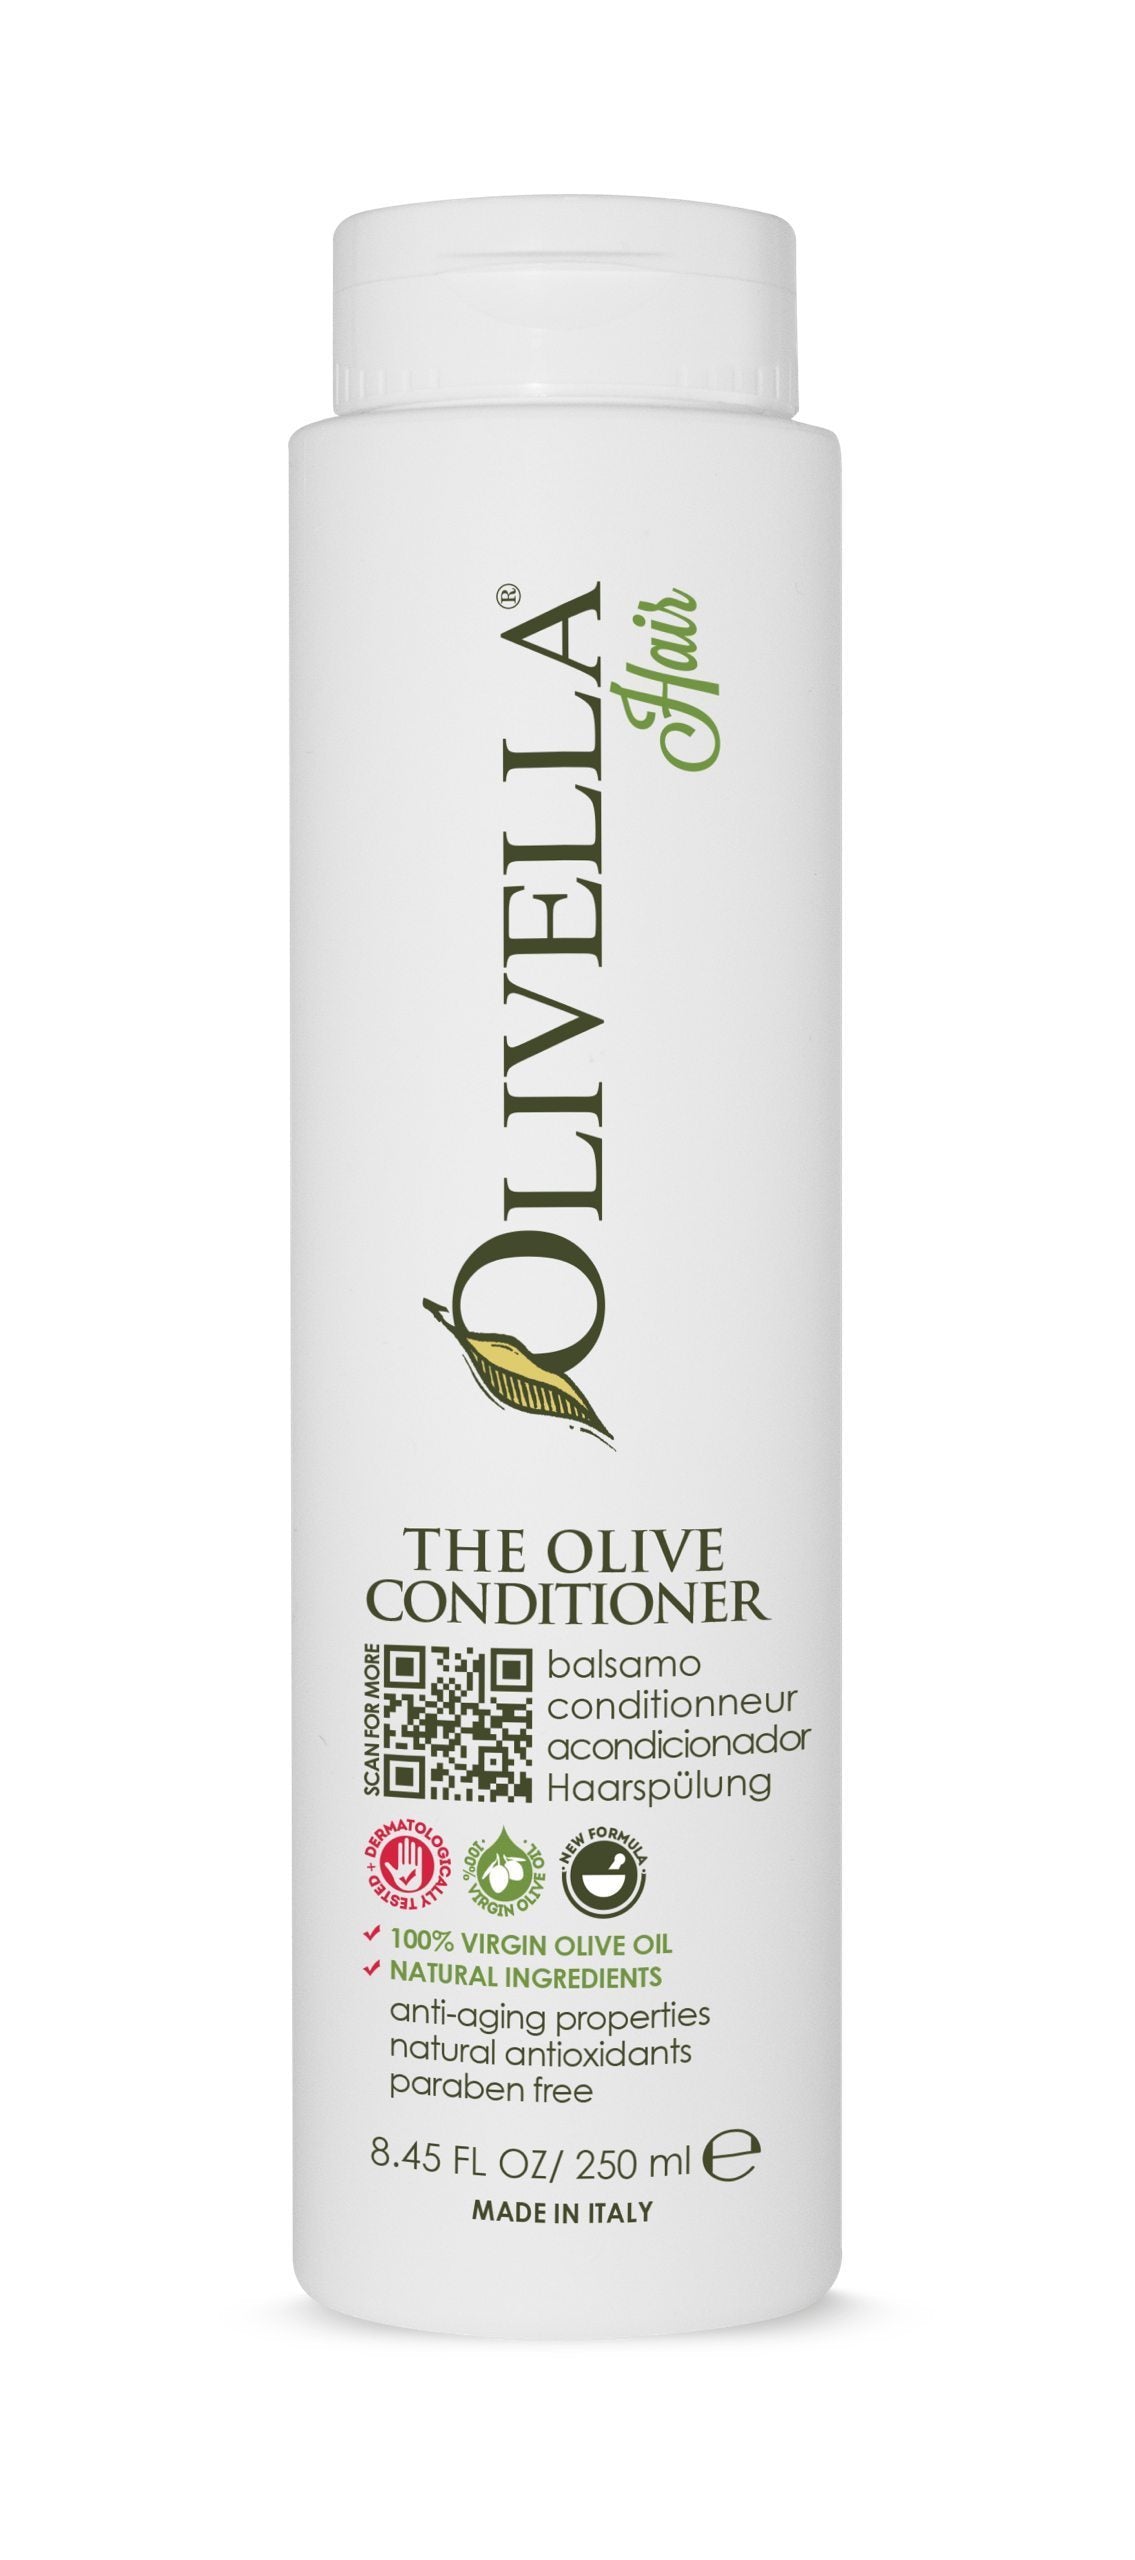 Olivella The Olive Conditioner - Olivella Official Store